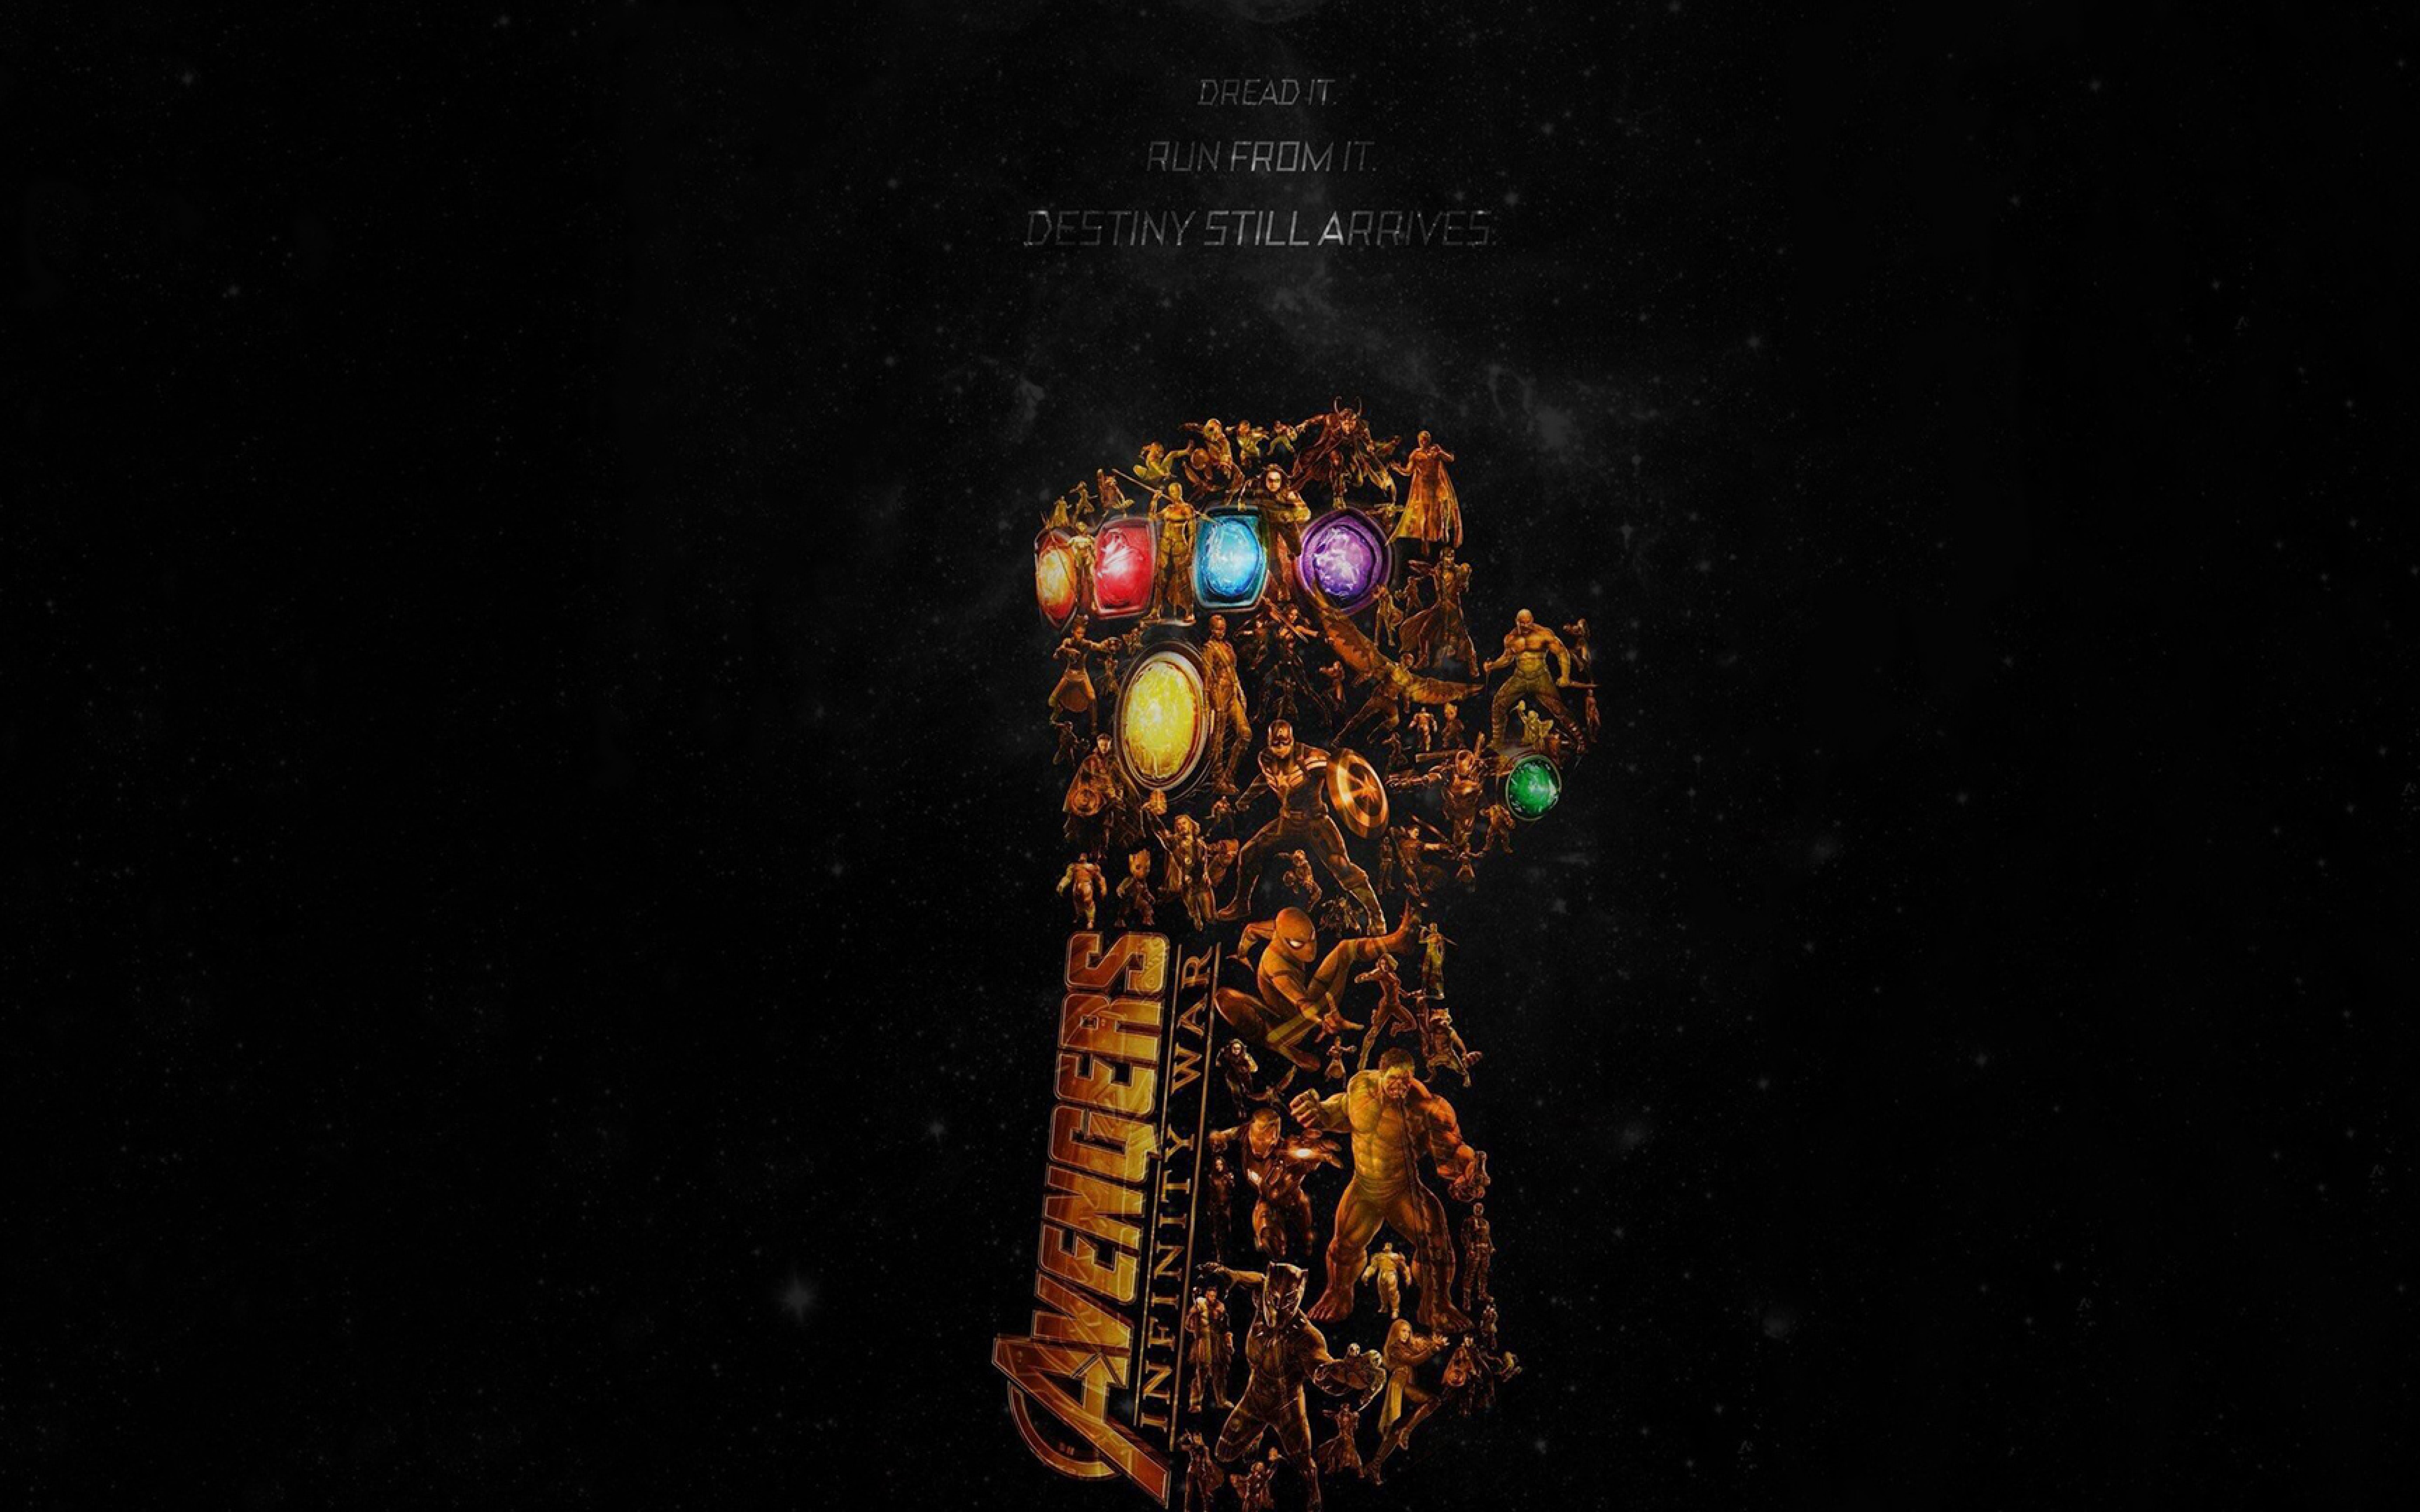 8888x5555 Avengers Infinity War Latest Poster 8888x5555 Resolution Wallpaper,  HD Movies 4K Wallpapers, Images, Photos and Background - Wallpapers Den